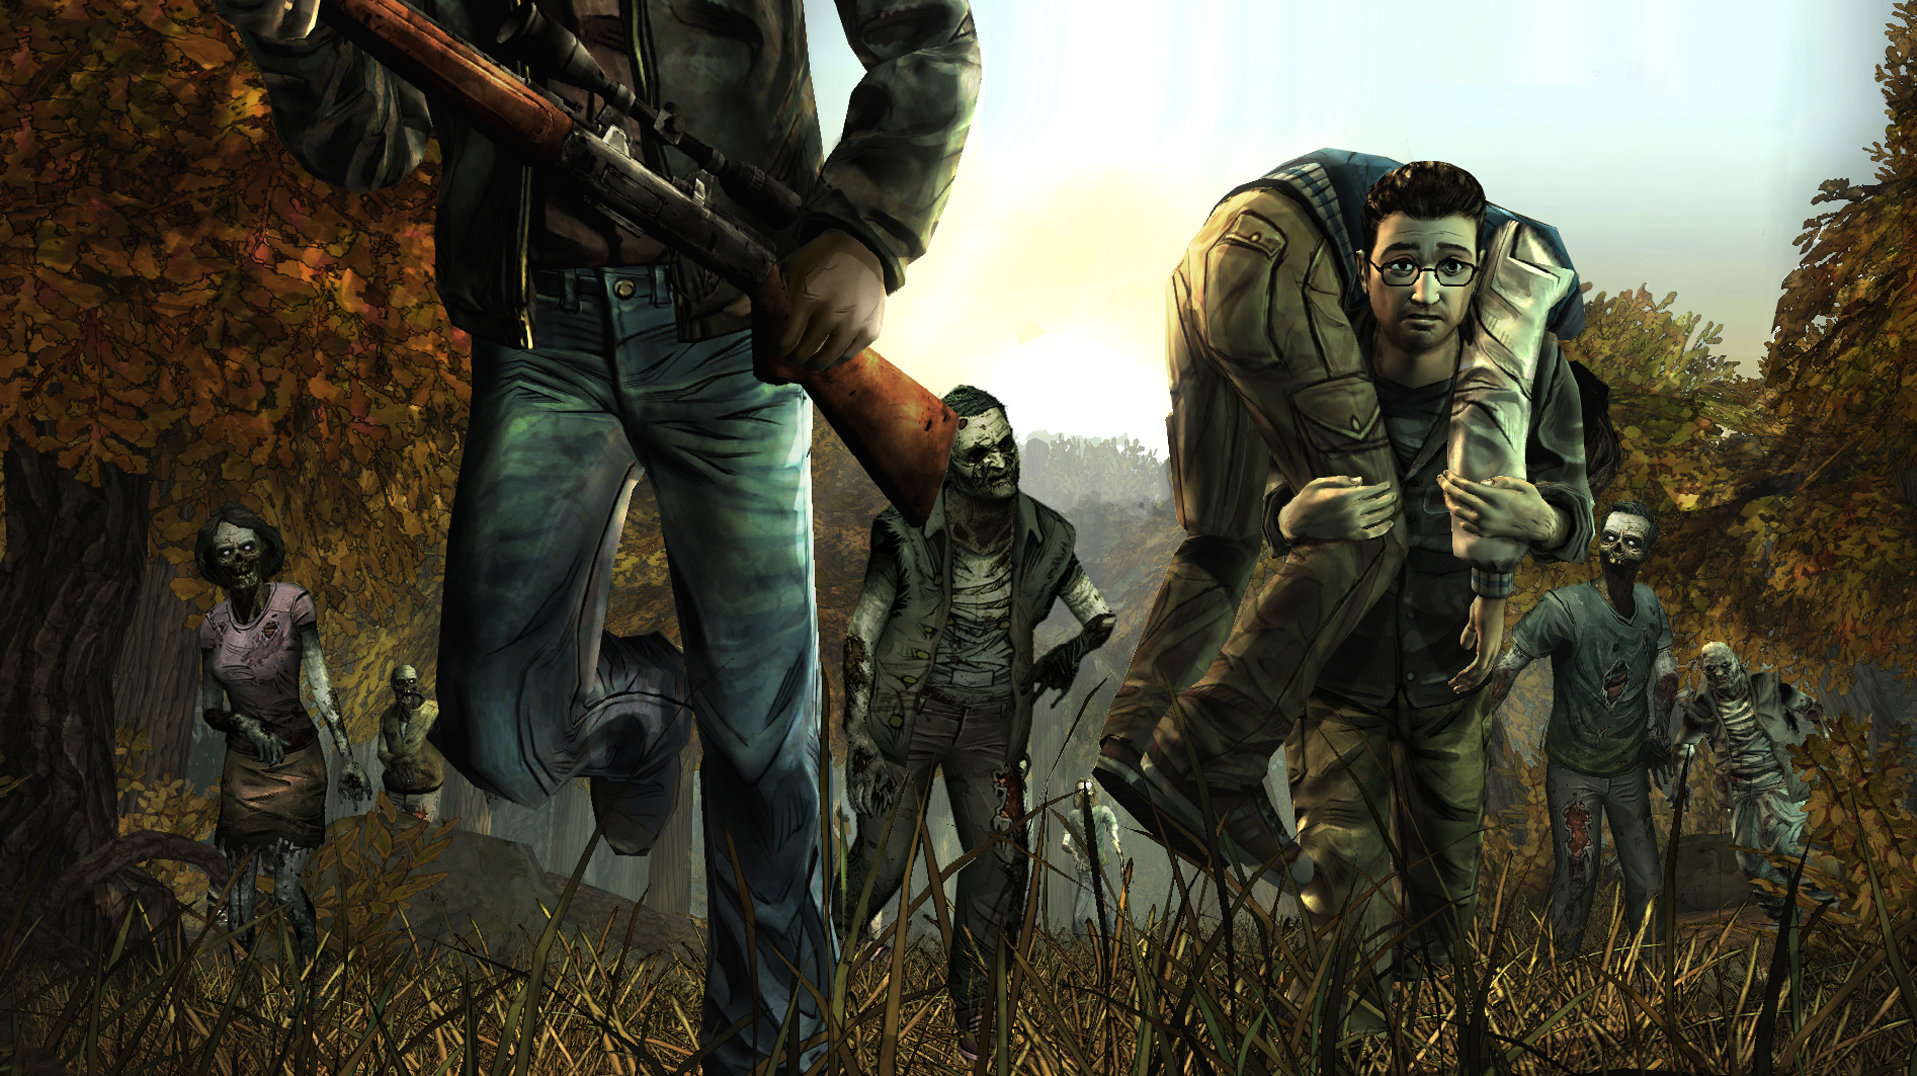 Can I buy season 2 of The Walking Dead one game episode at a time?